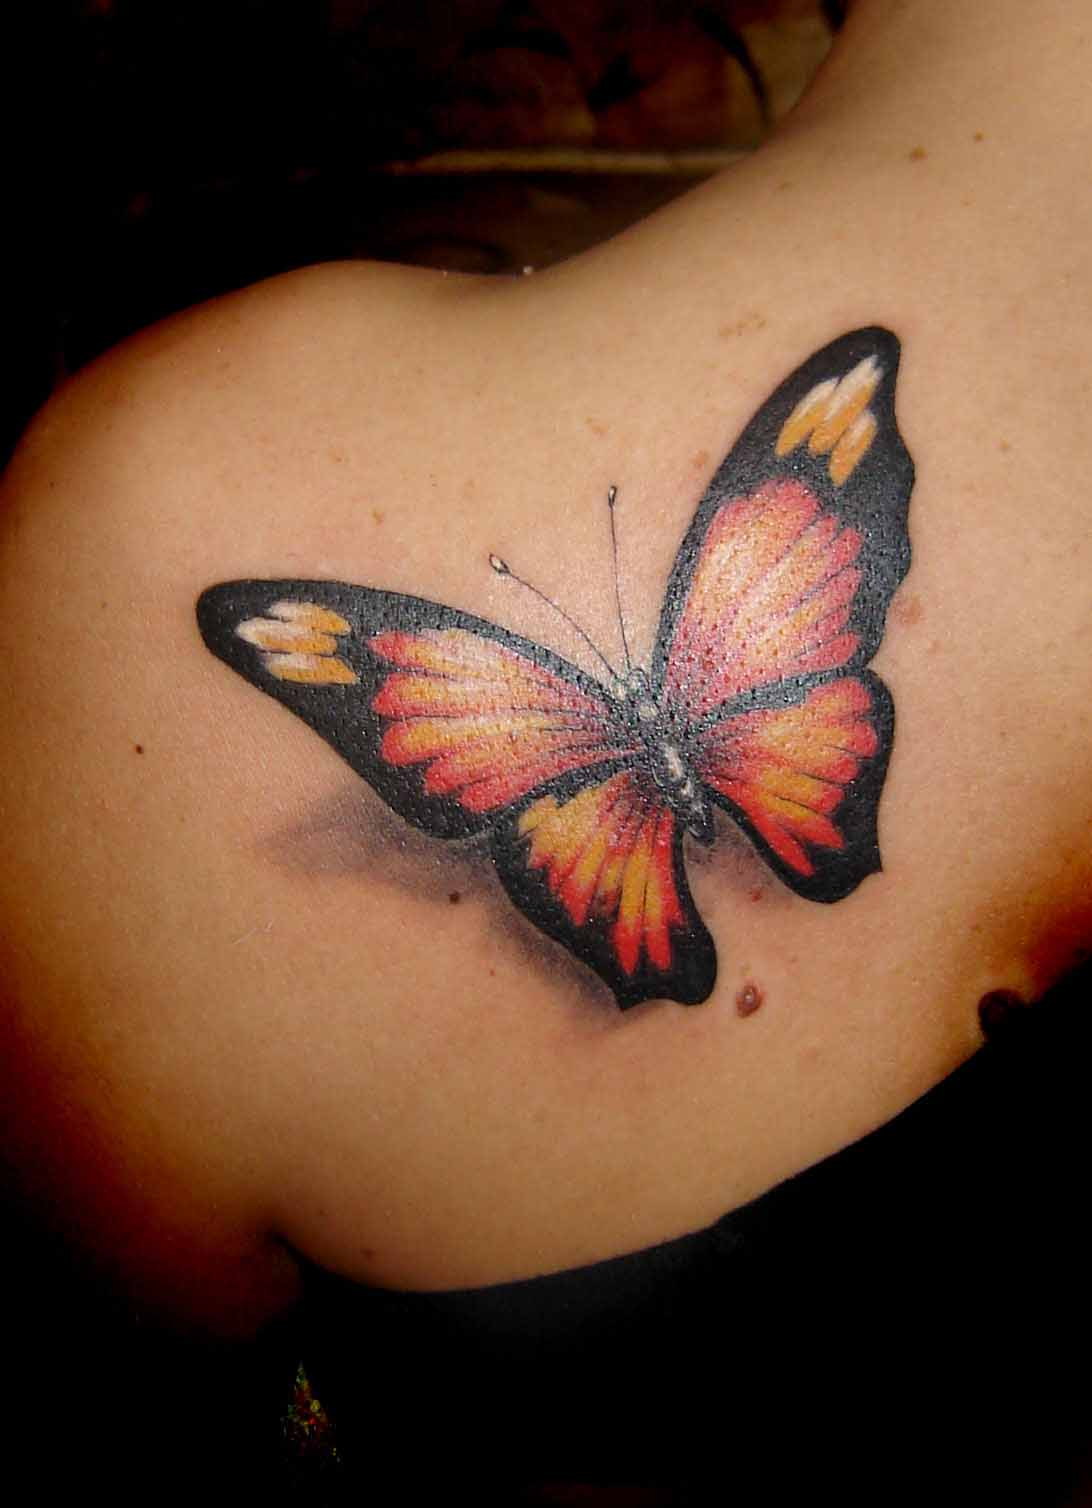 Tattoo Designs for Women in 2016